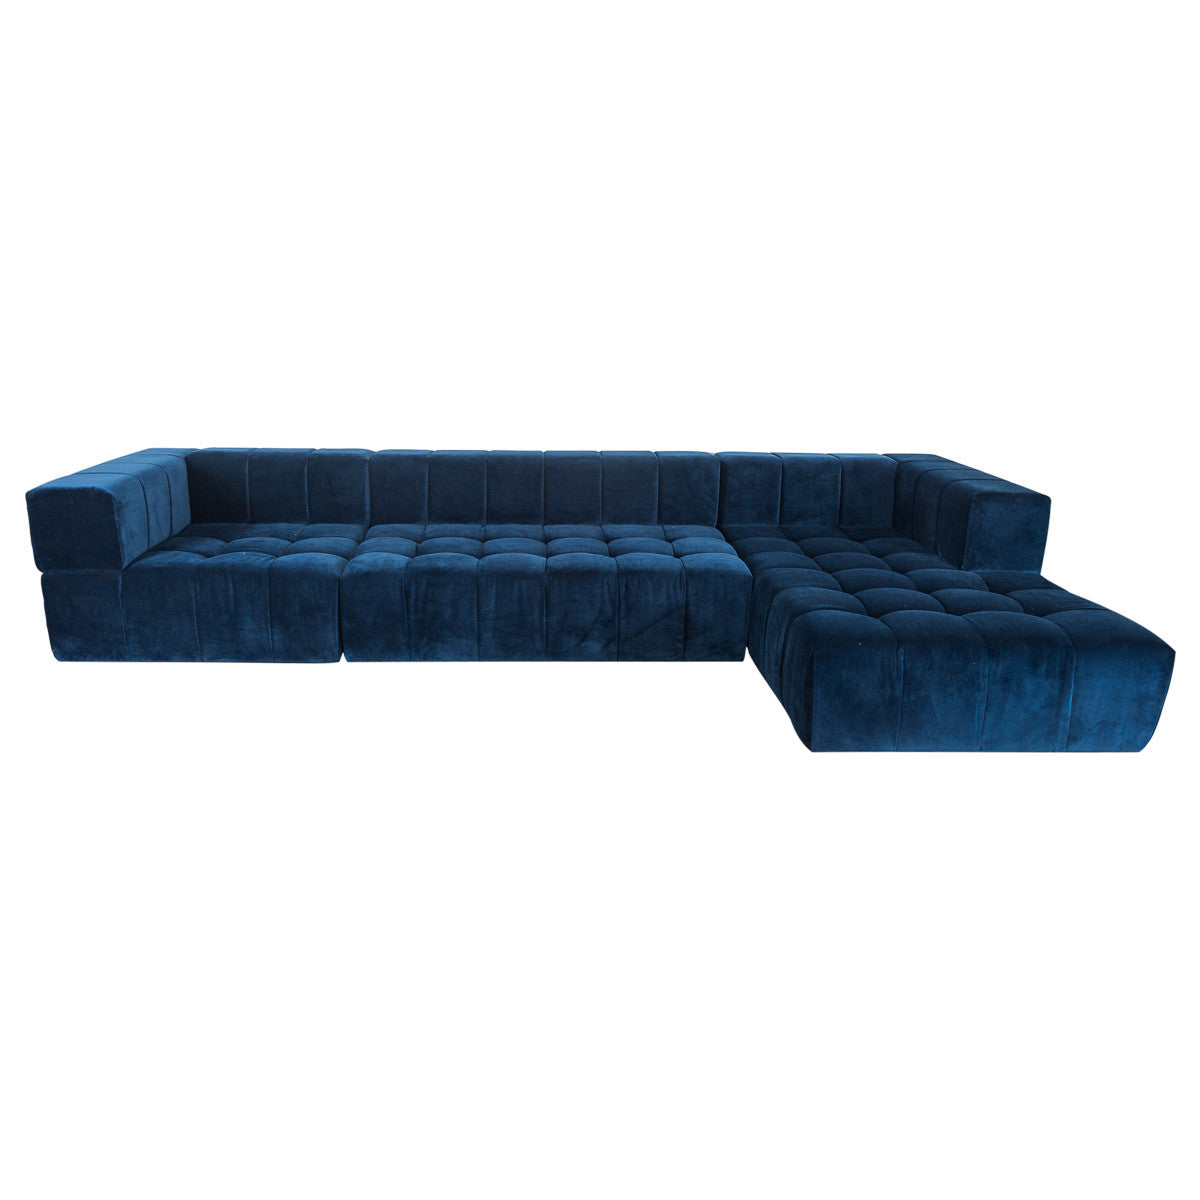 Delano Sectional with Chaise in Navy Velvet - ModShop1.com